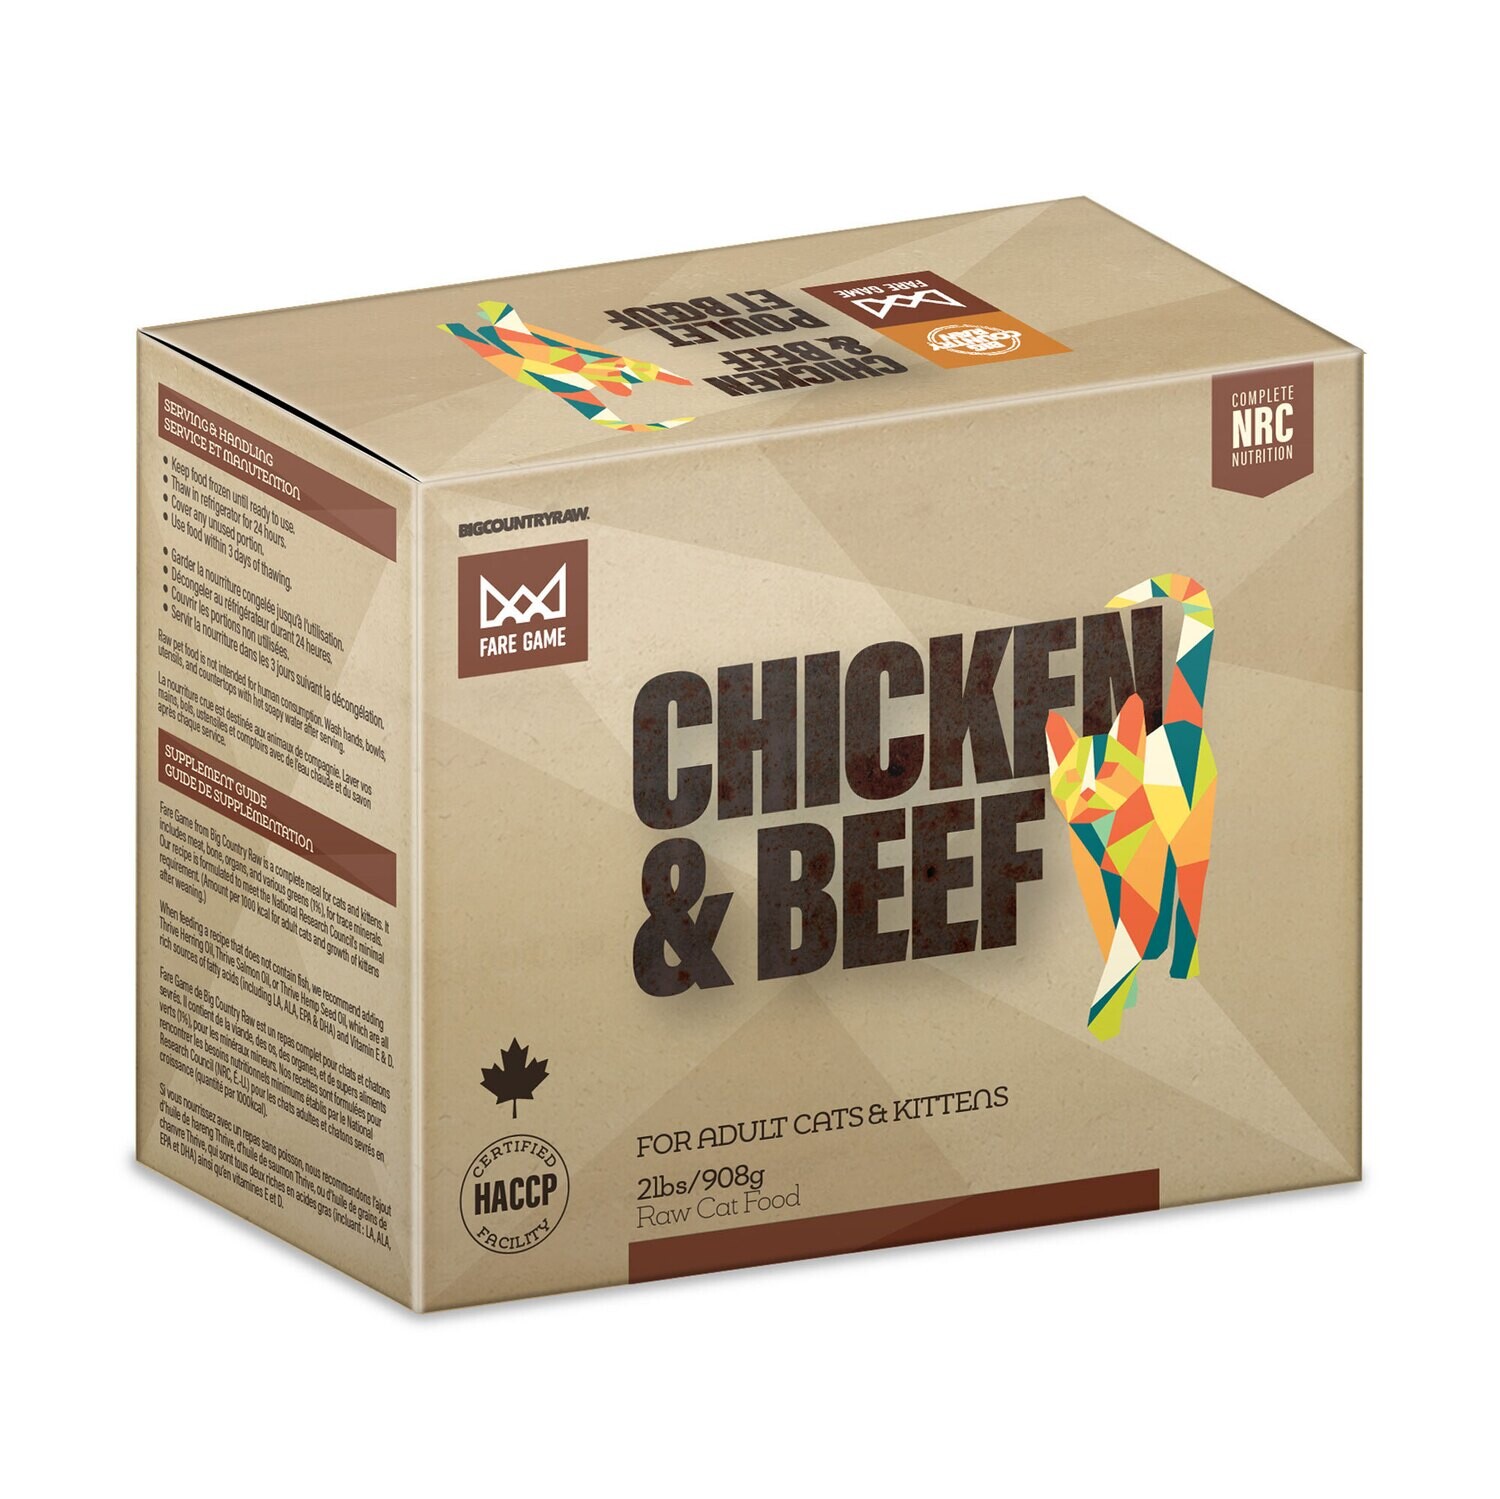 BCR FARE GAME CHICKEN & BEEF 2LB